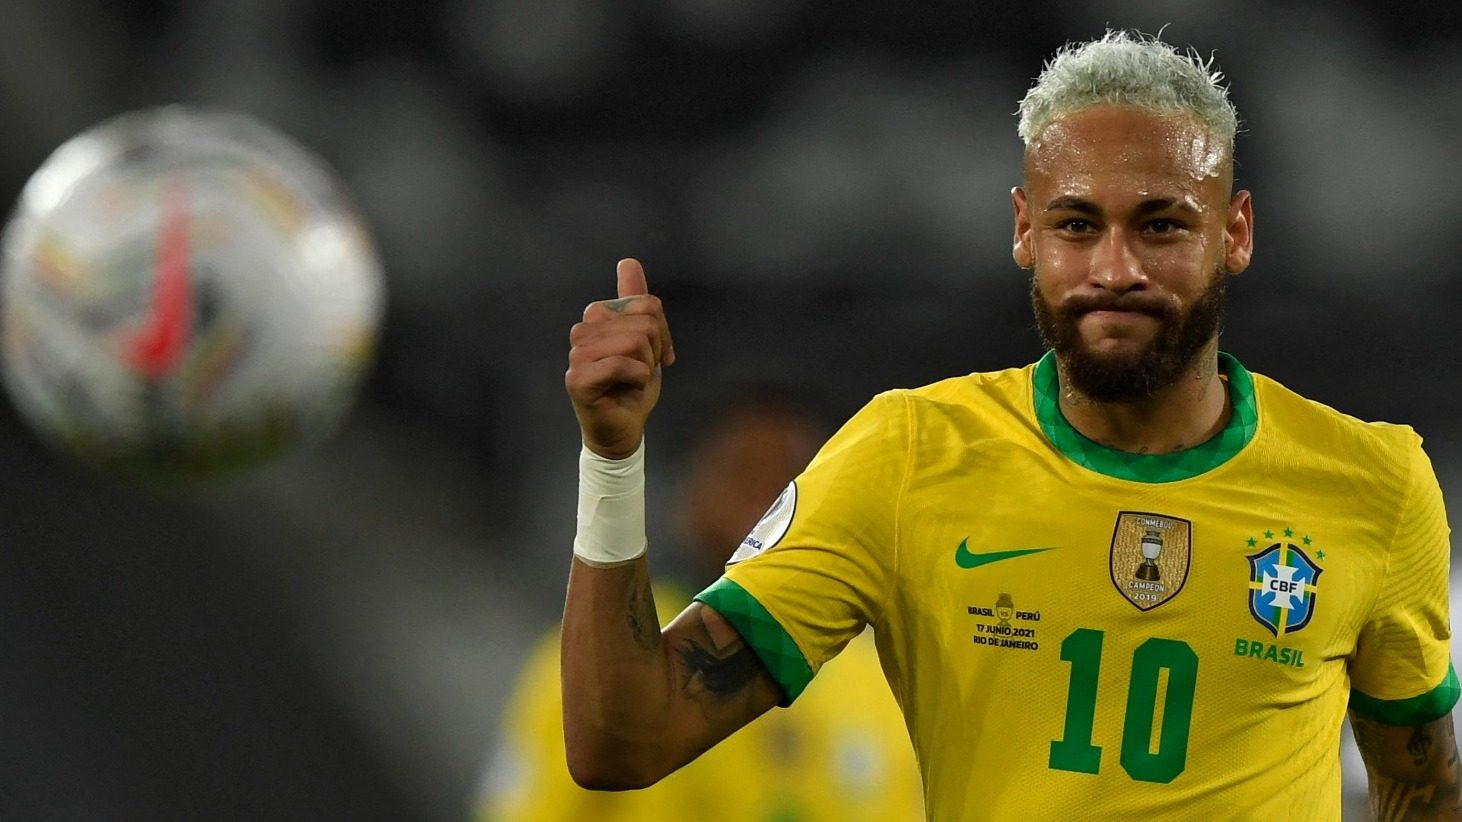 Brazil S Football Squad For Tokyo 2020 Olympics Neymar Left Out